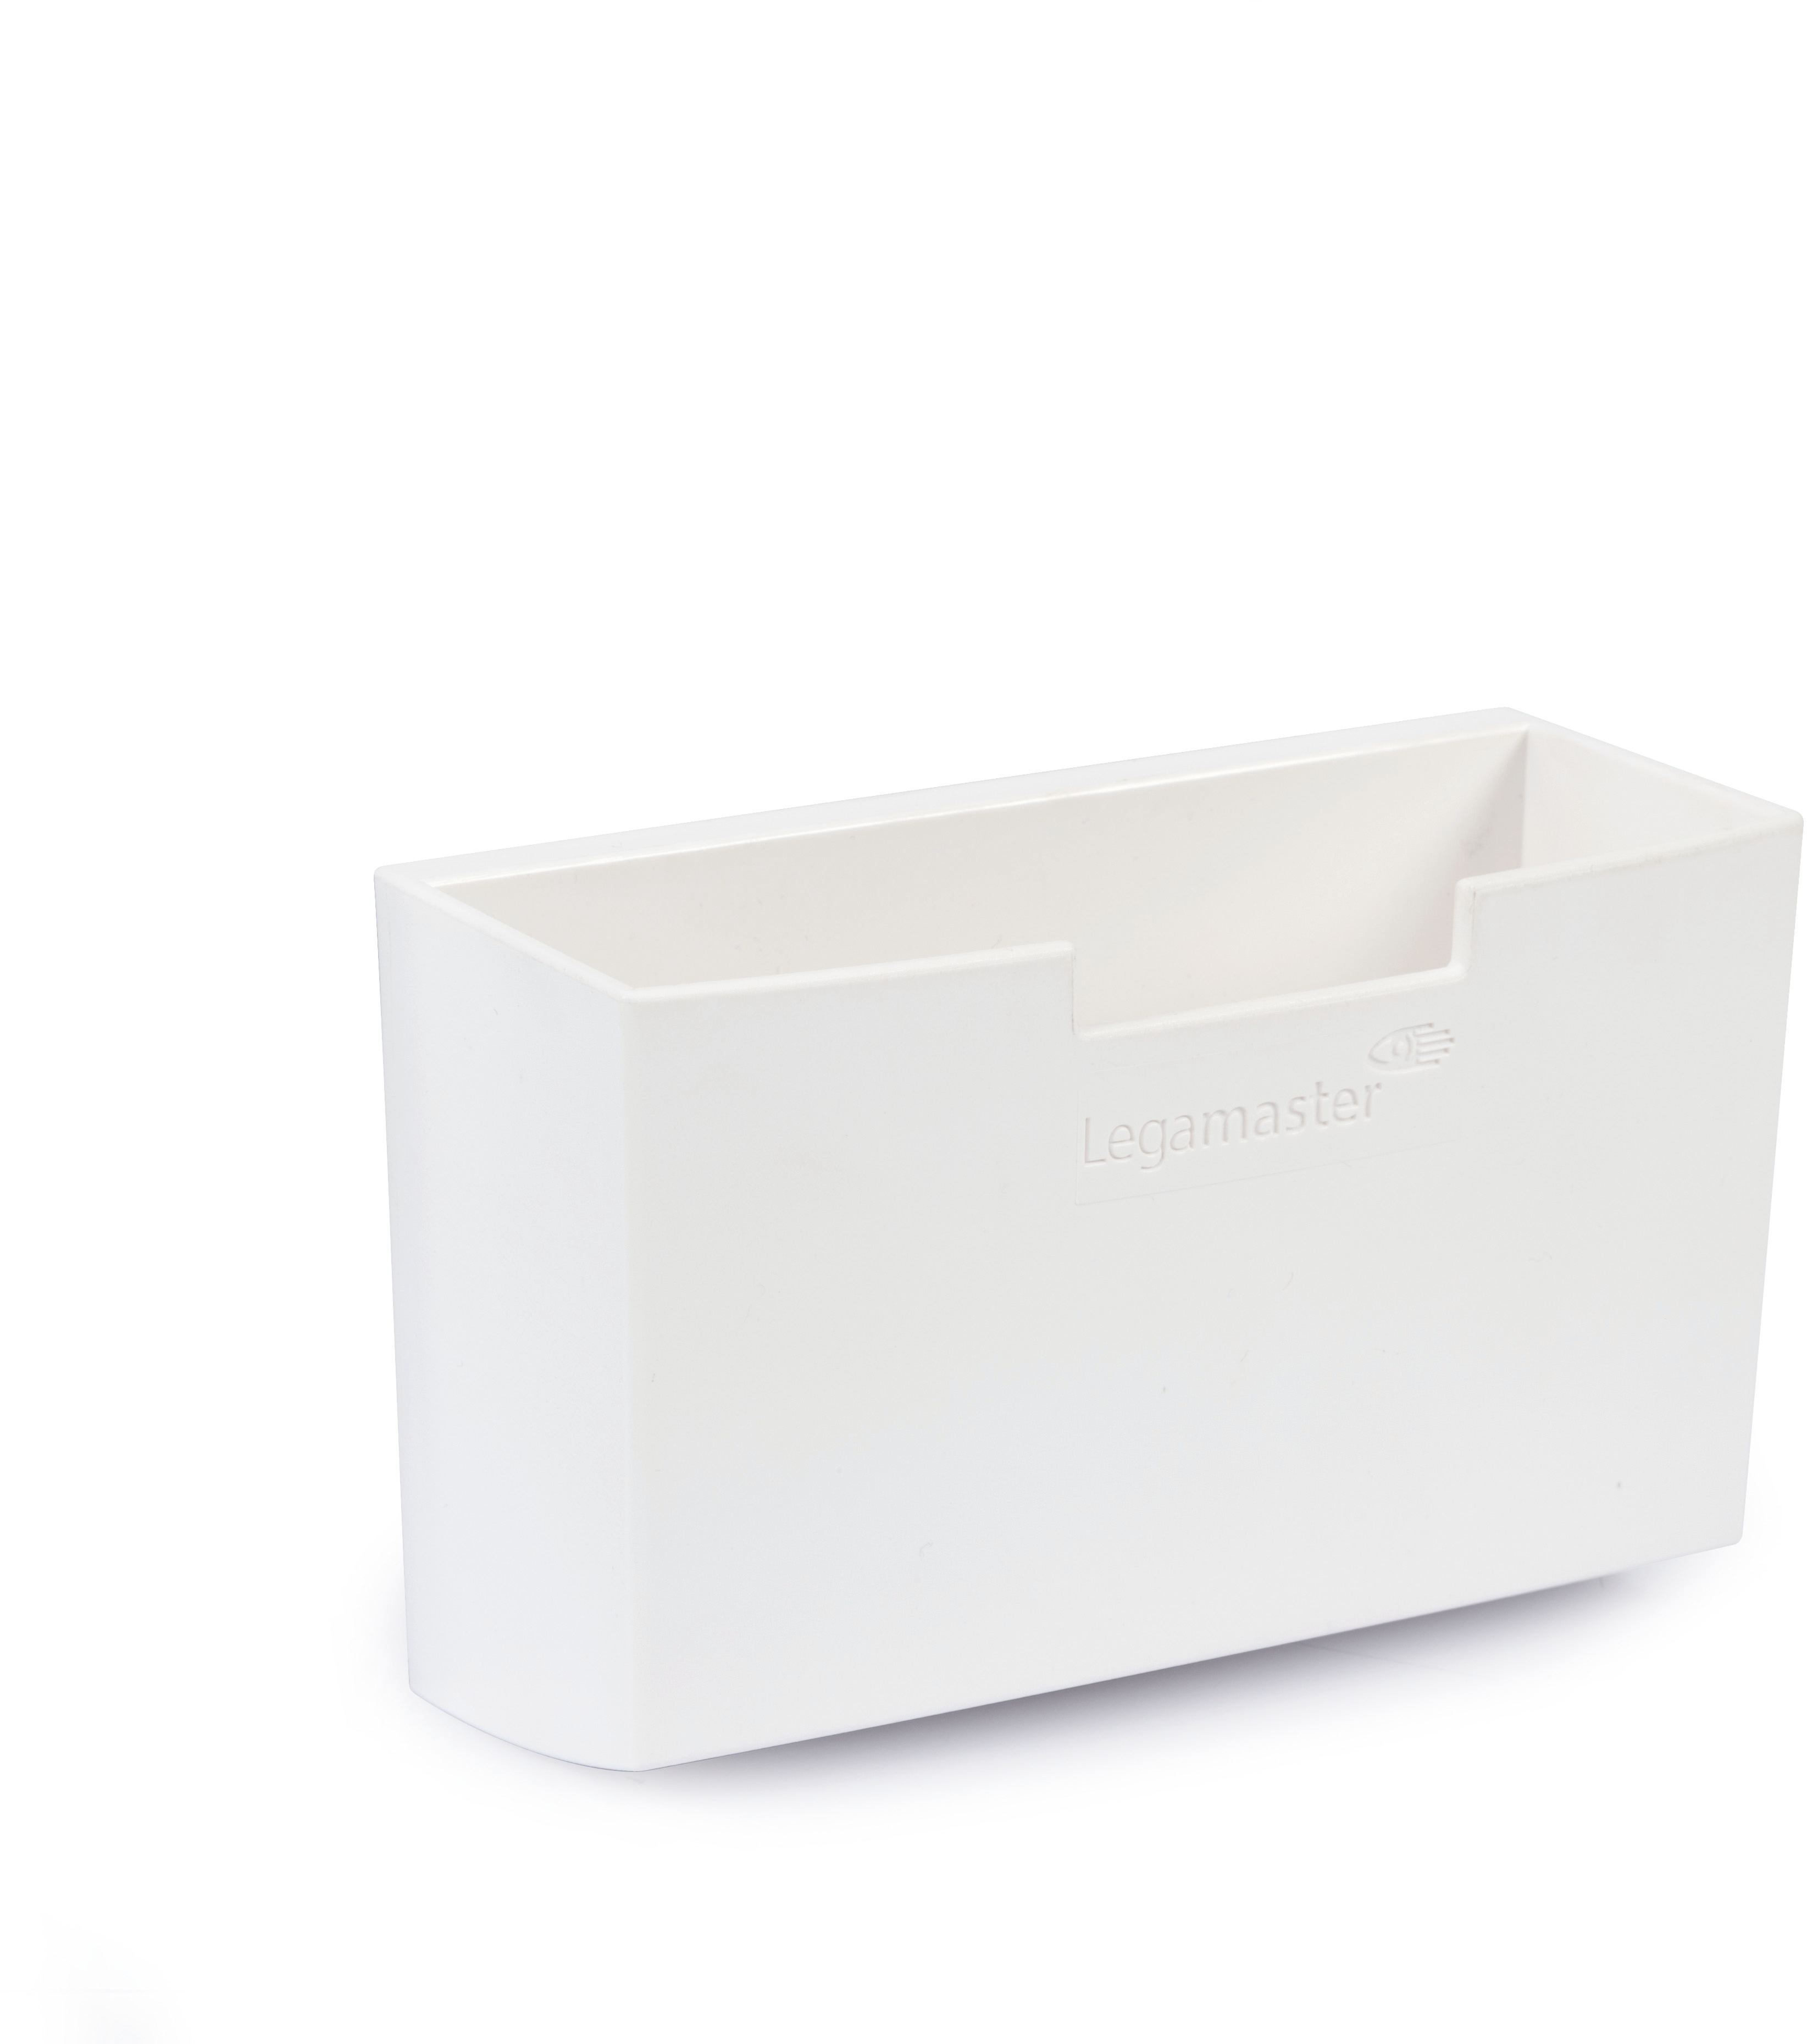 LEGAMASTER Support 15x10x7cm 7-122600 blanc, PP